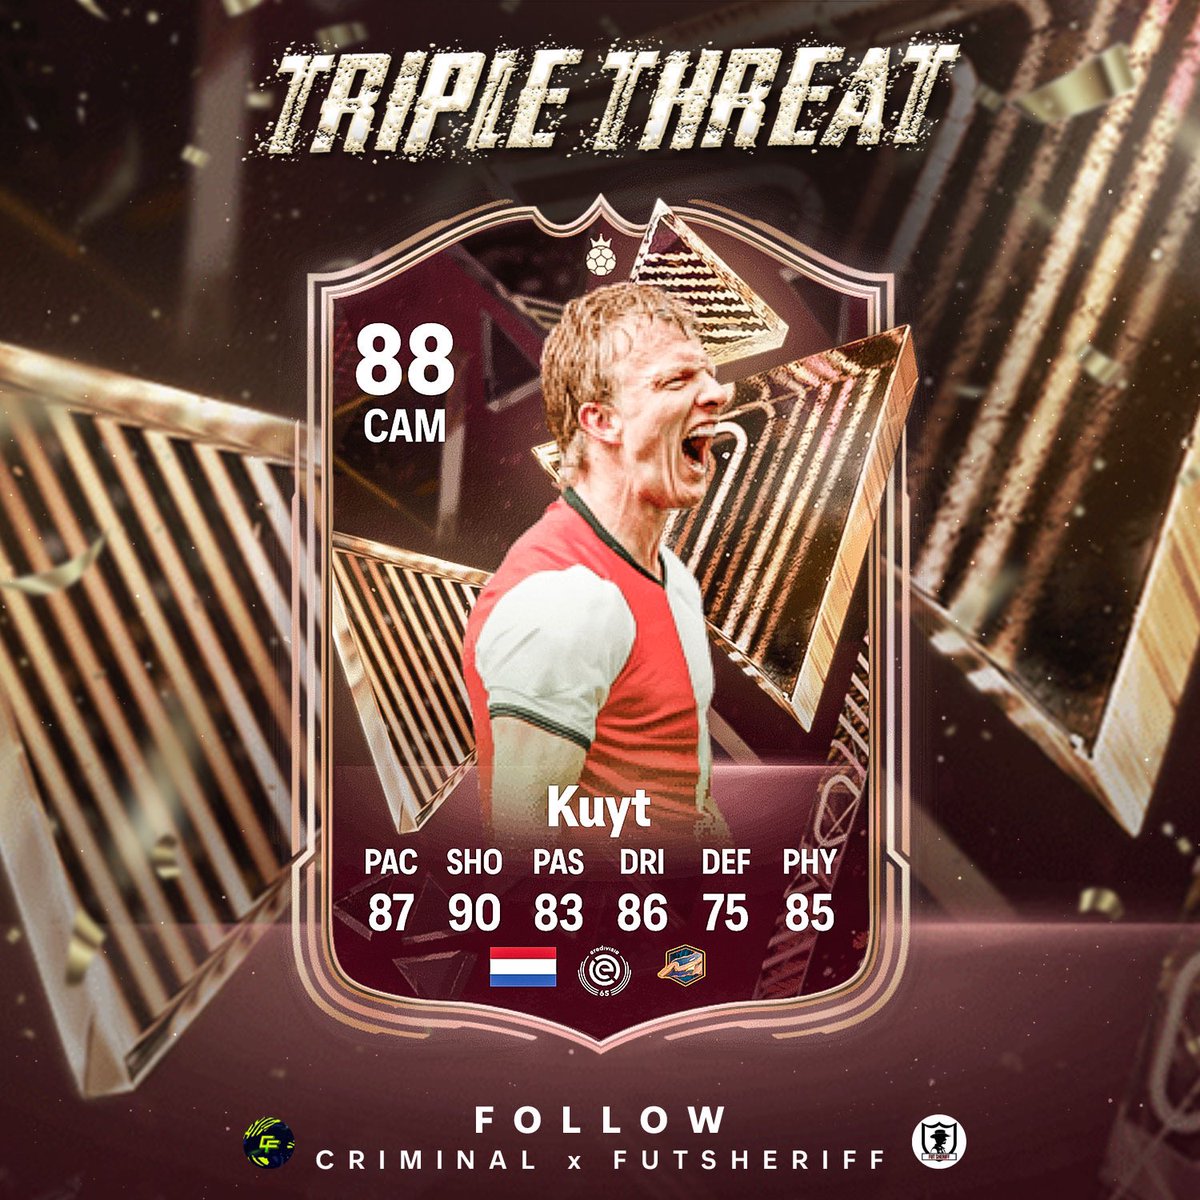 FUT Sheriff - 💥Kuyt 🇳🇱 has a card listed to come as